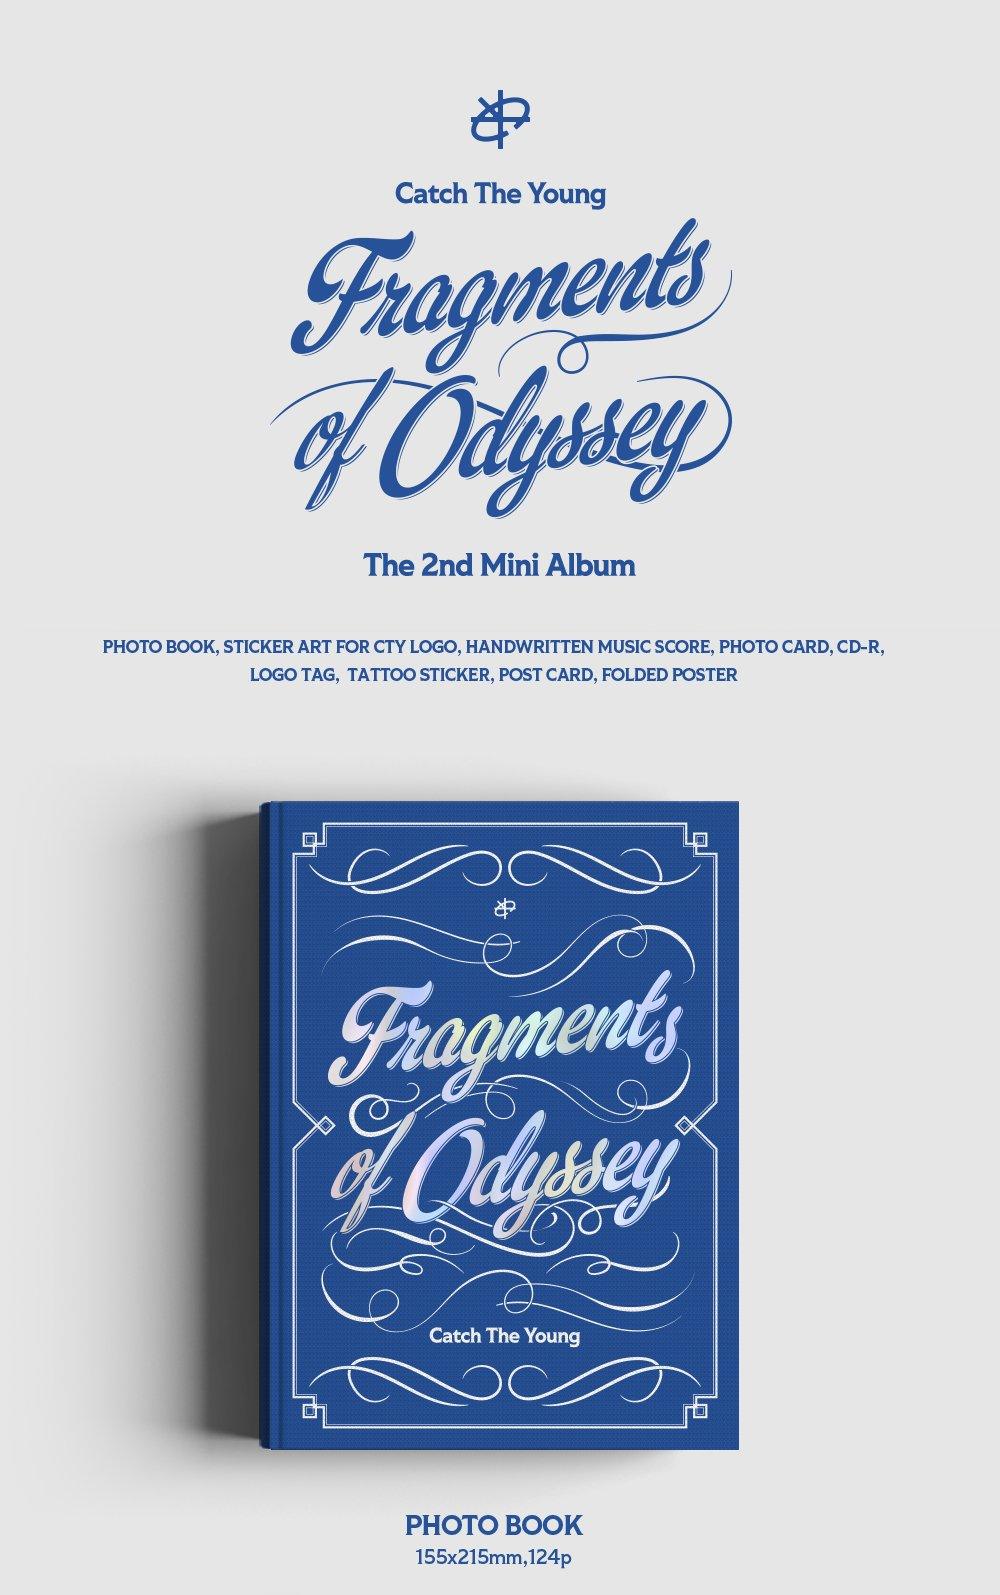 [PRE ORDER] CATCH THE YOUNG - [FRAGMENTS OF ODYSSEY] - KAEPJJANG SHOP (캡짱 숍)